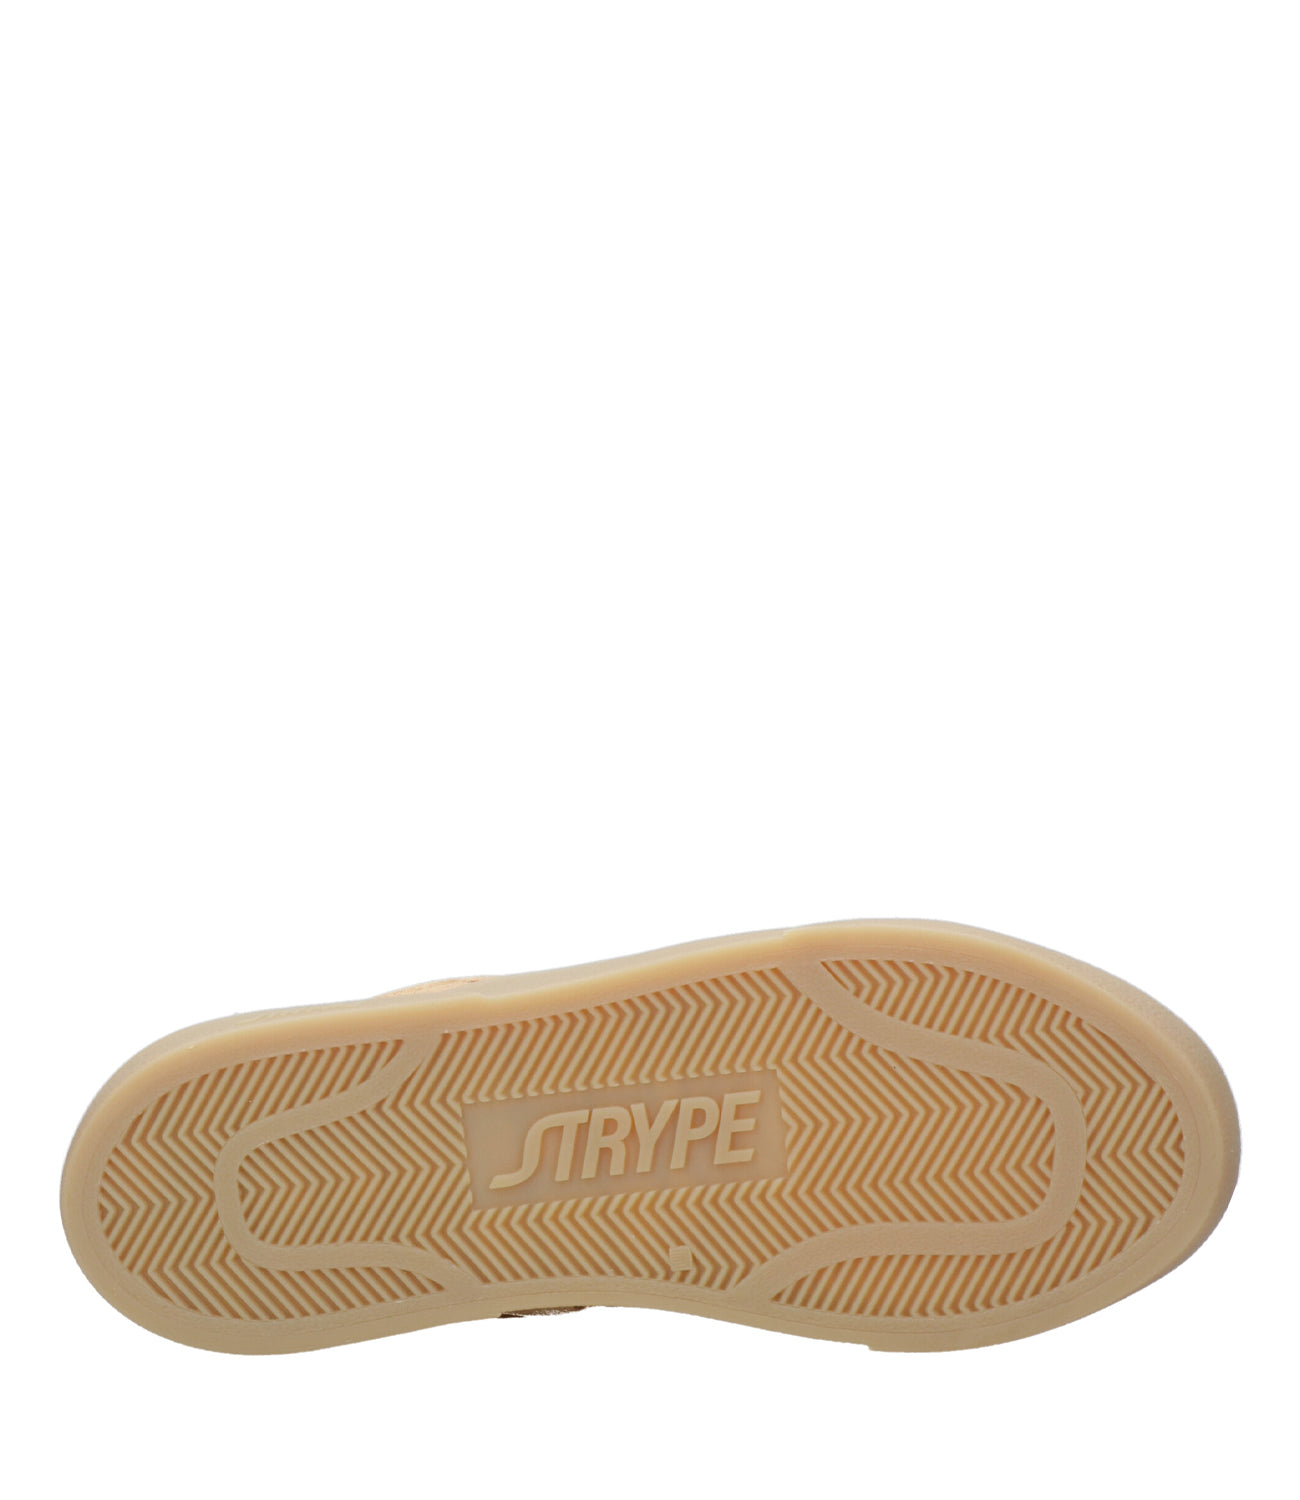 Strype | Sneakers Cammello